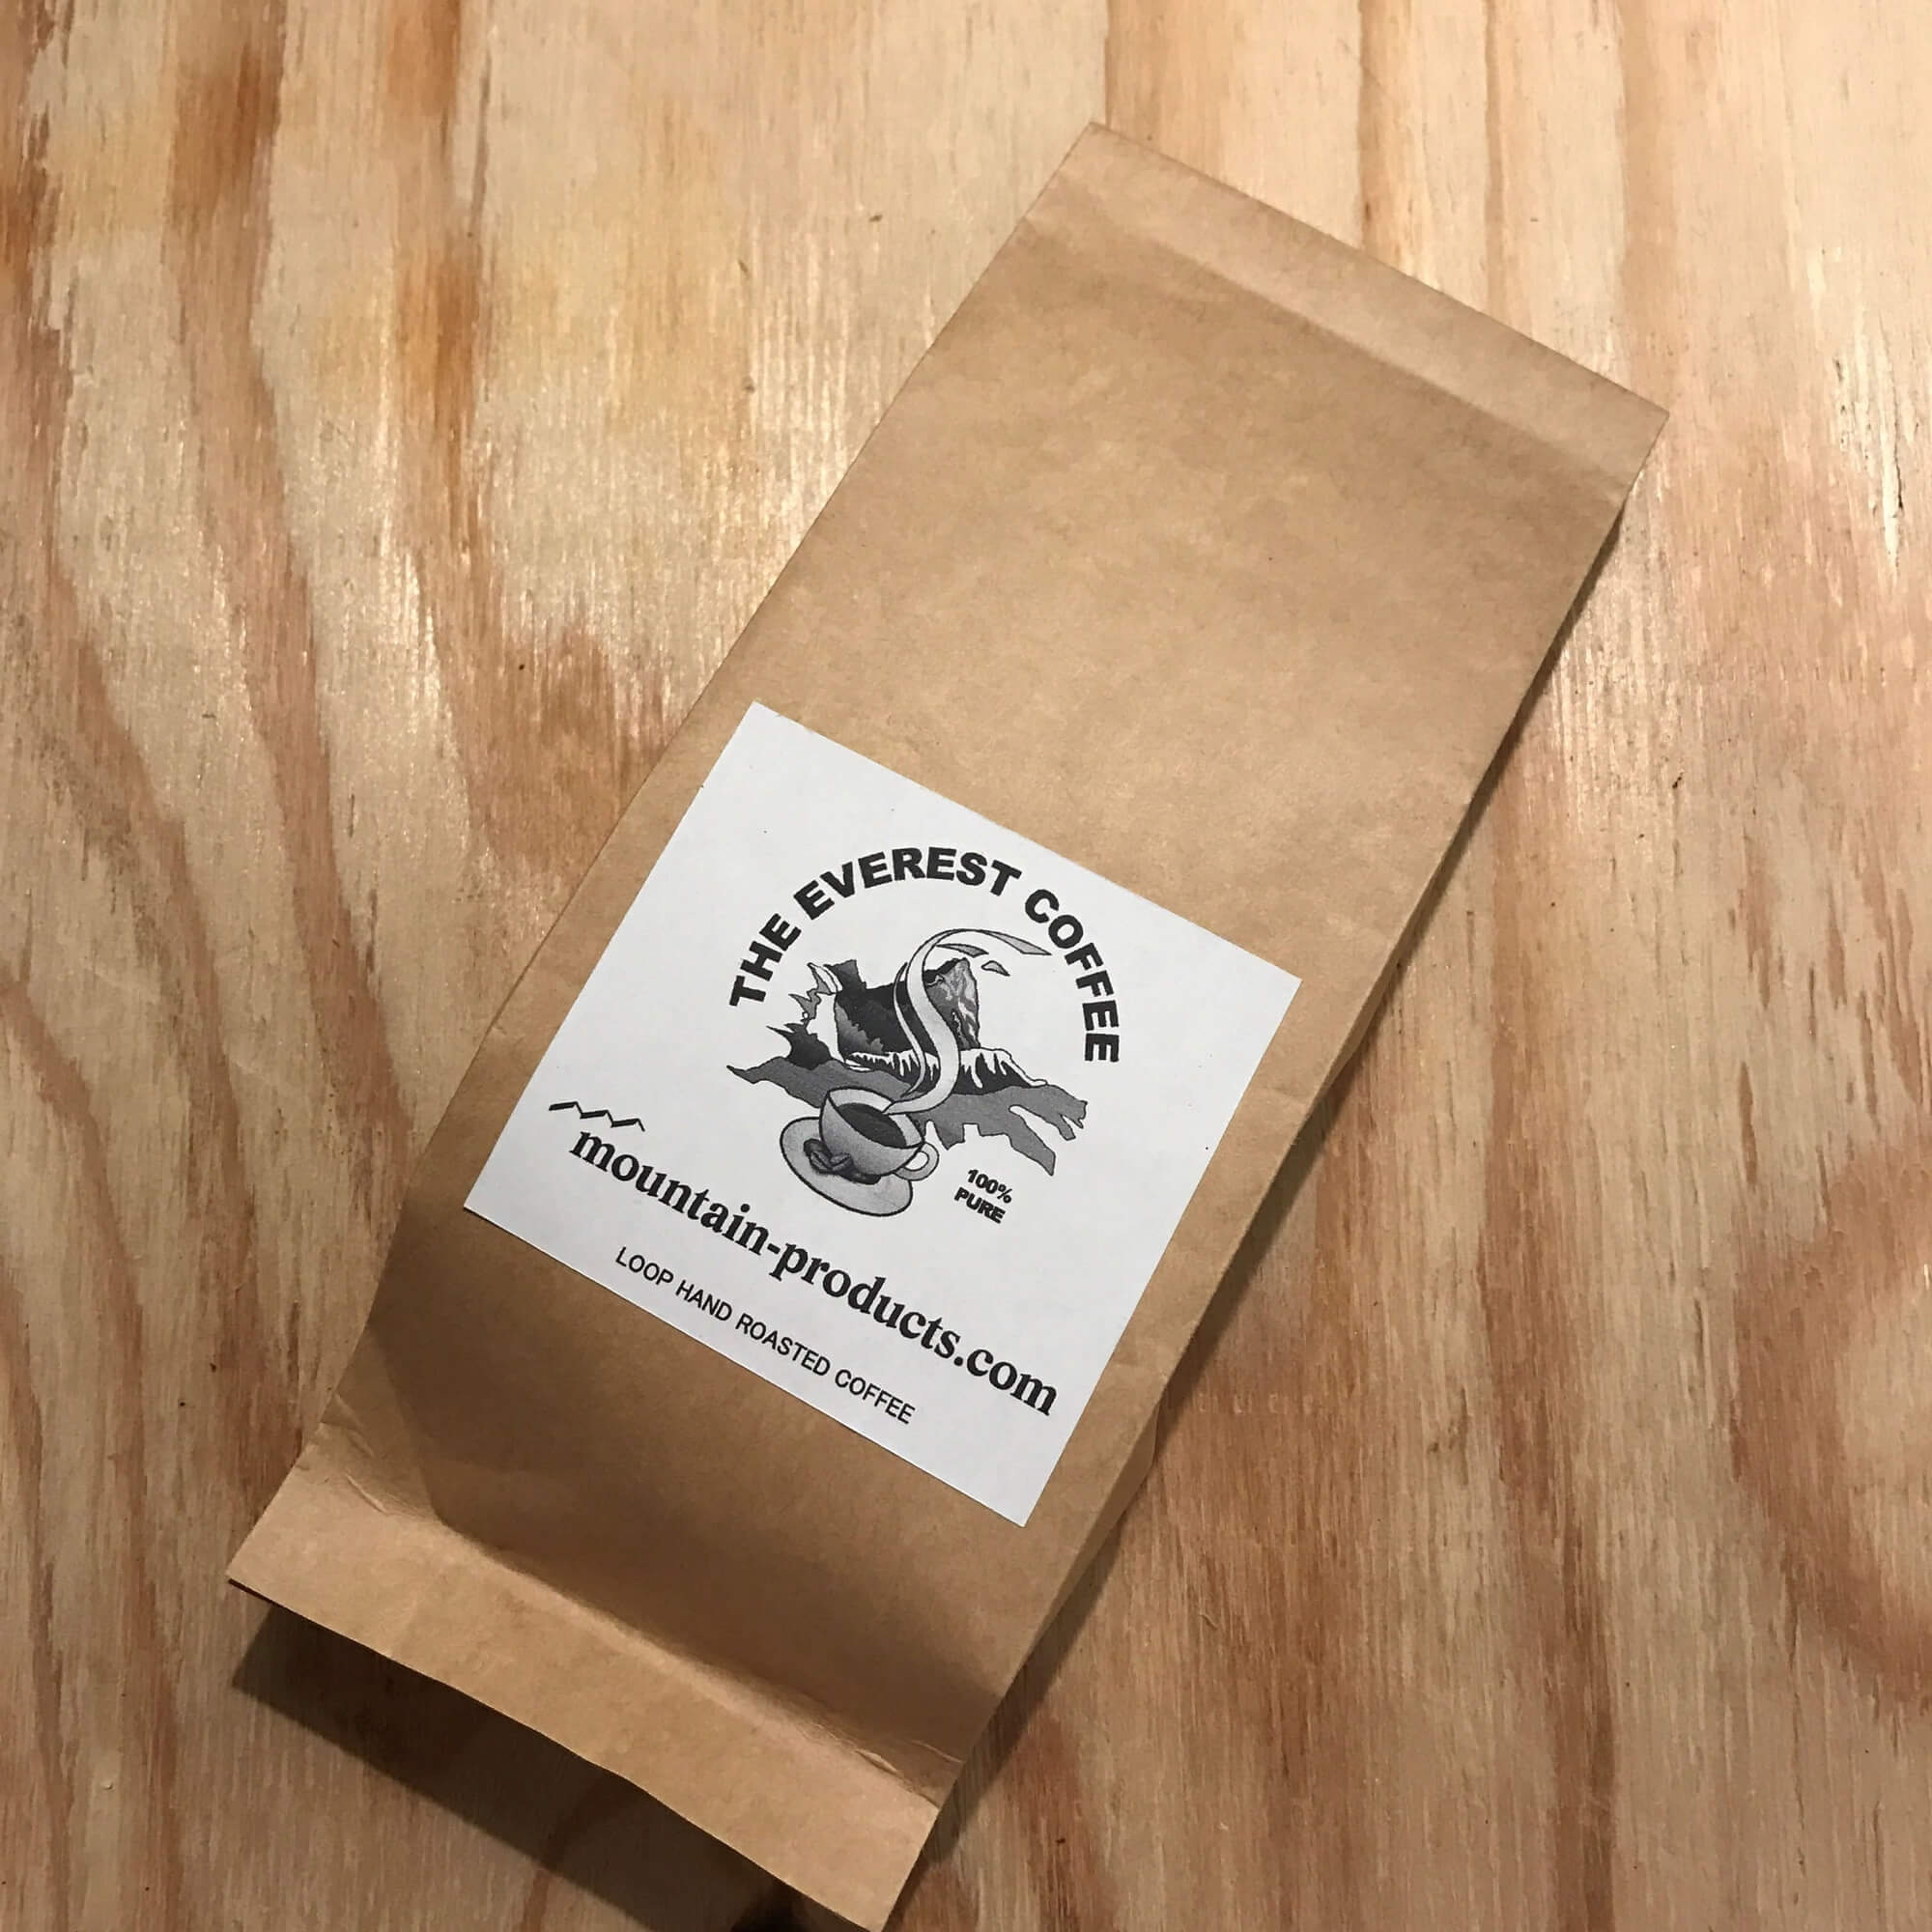 THE EVEREST COFFEE  Roasted beans 200g package 豆